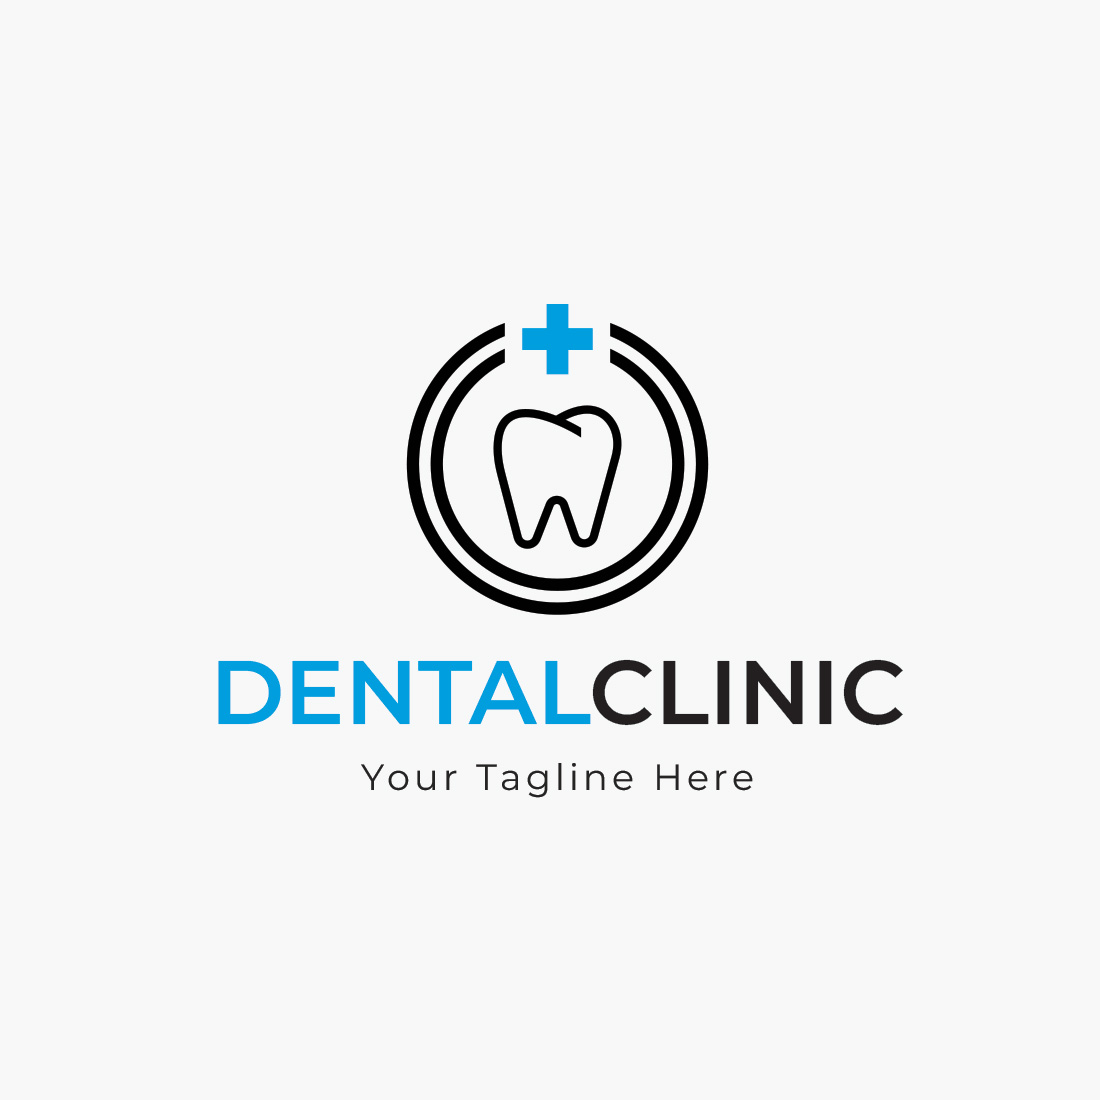 Dental Clinic Logo Template image cover.